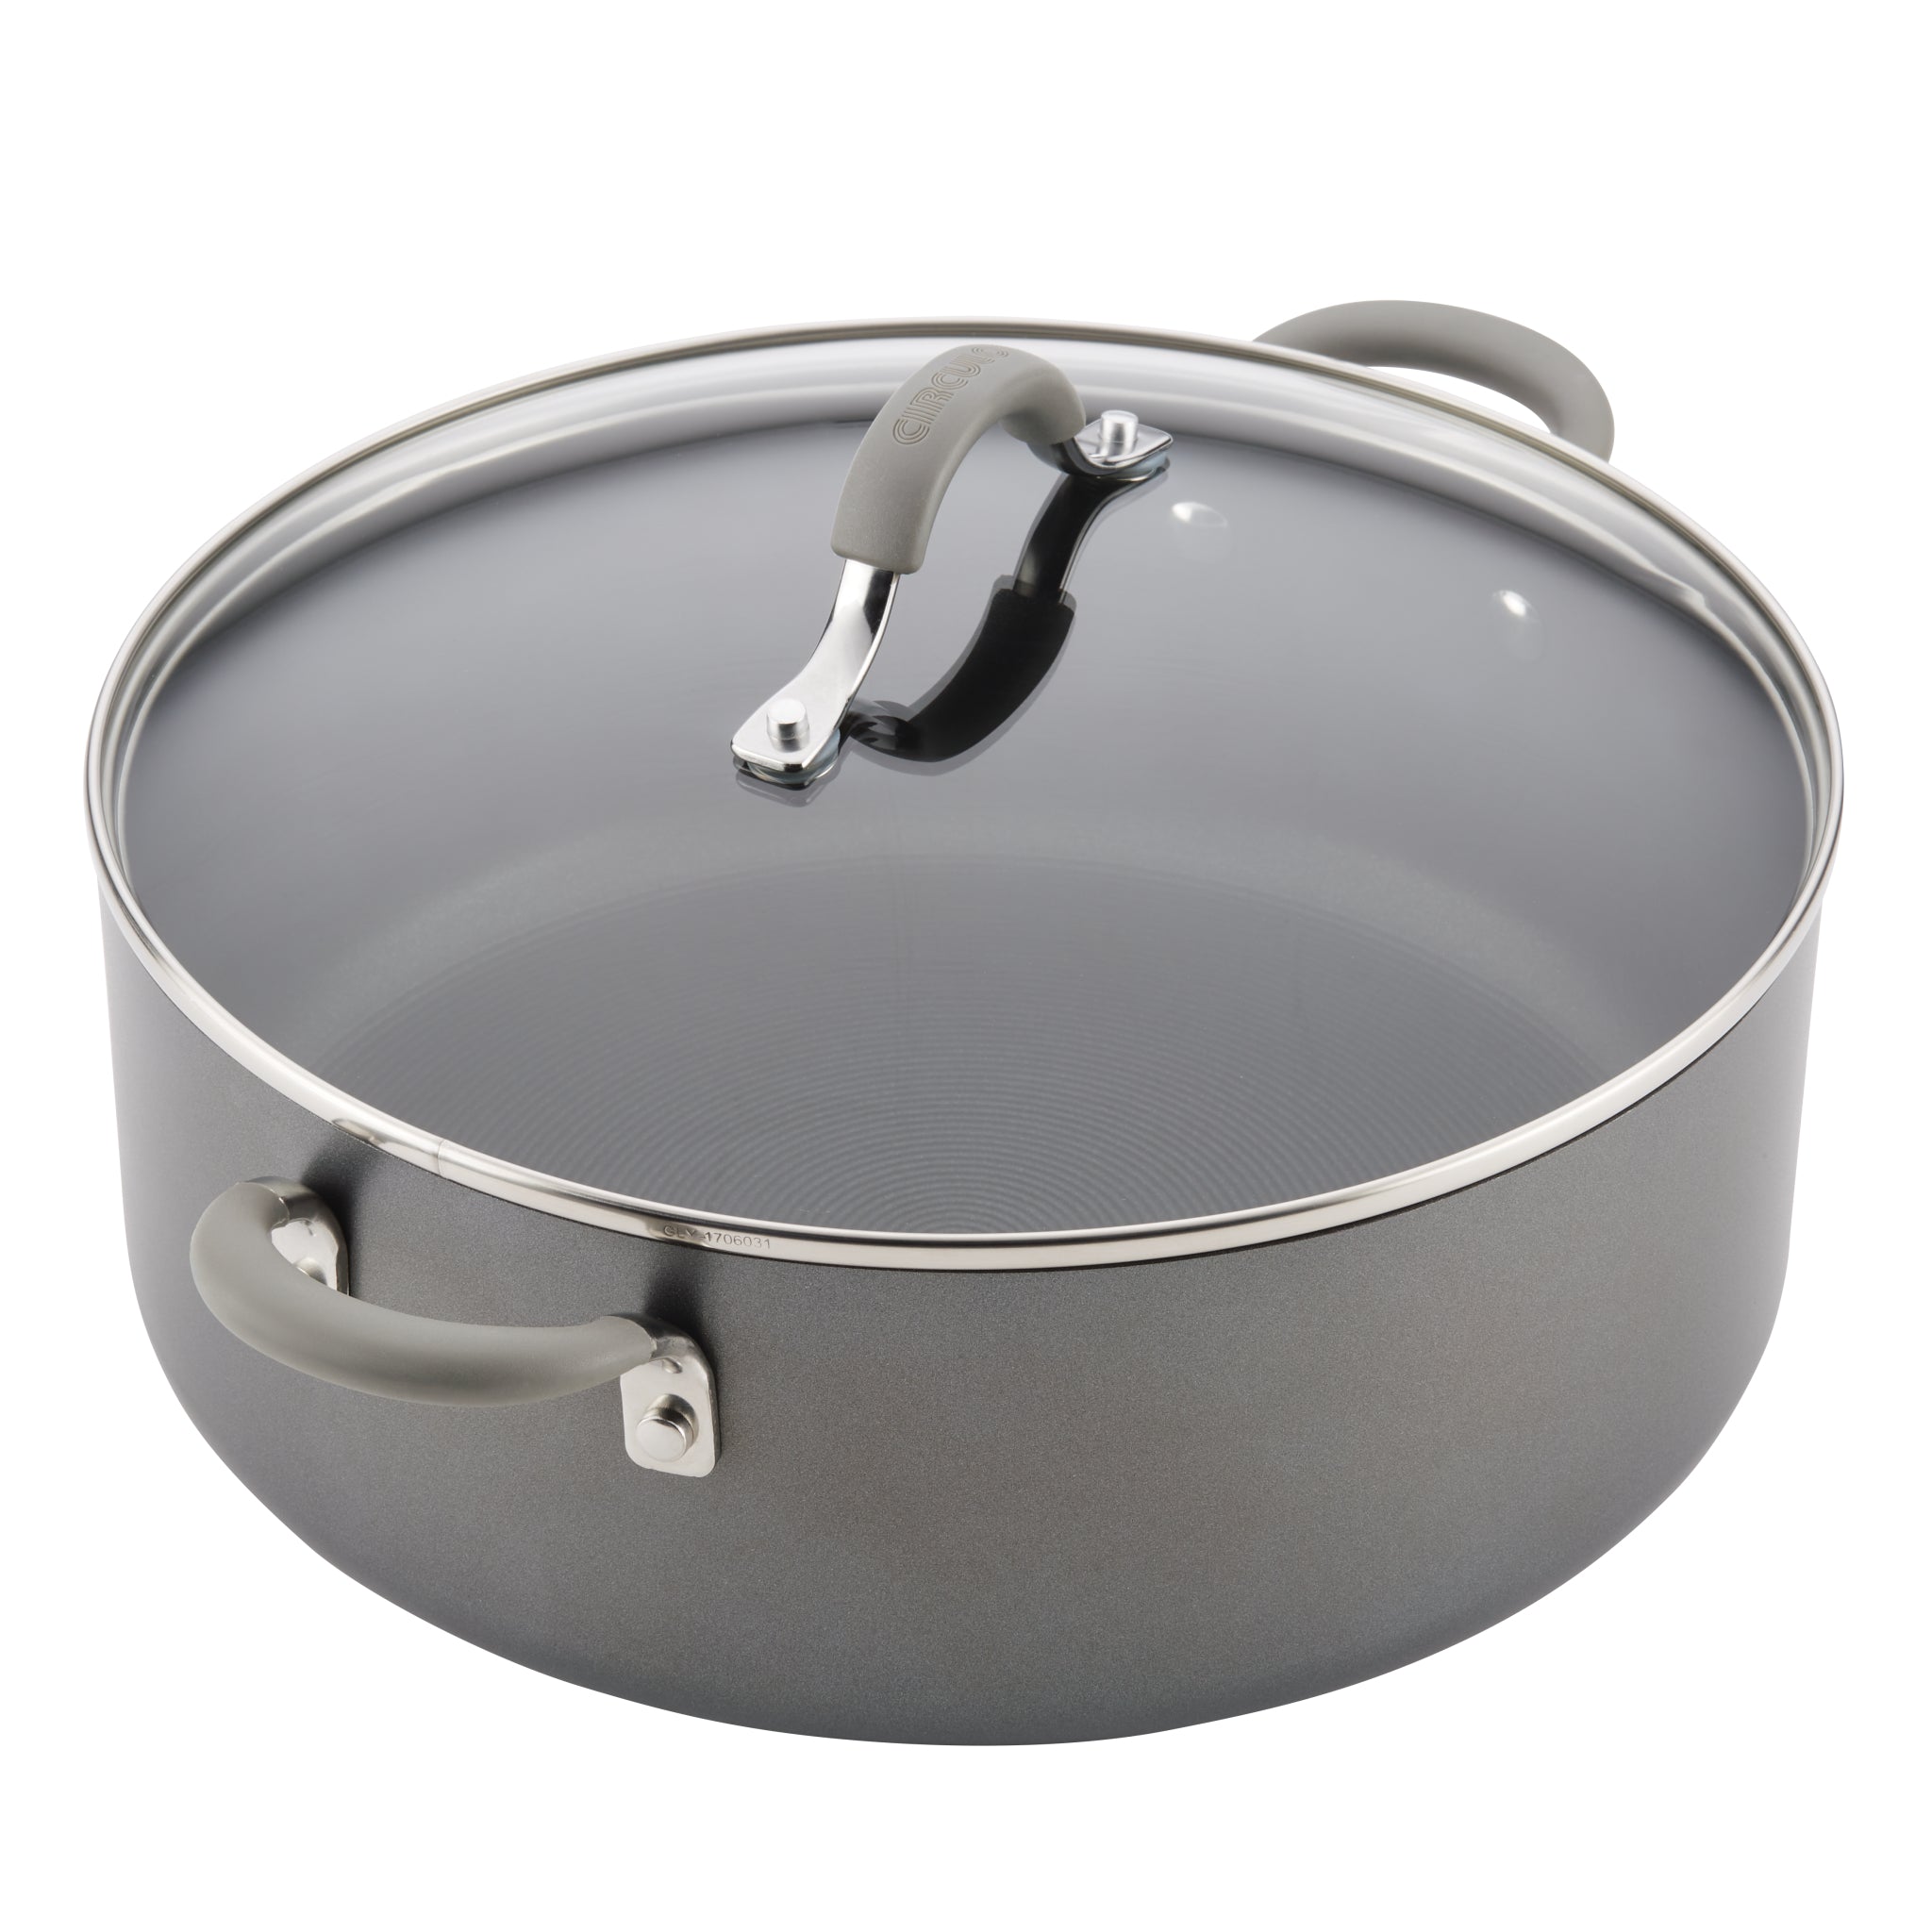 Circulon SteelShield Stainless Steel 7.5-Qt. Stockpot with Lid, Silver